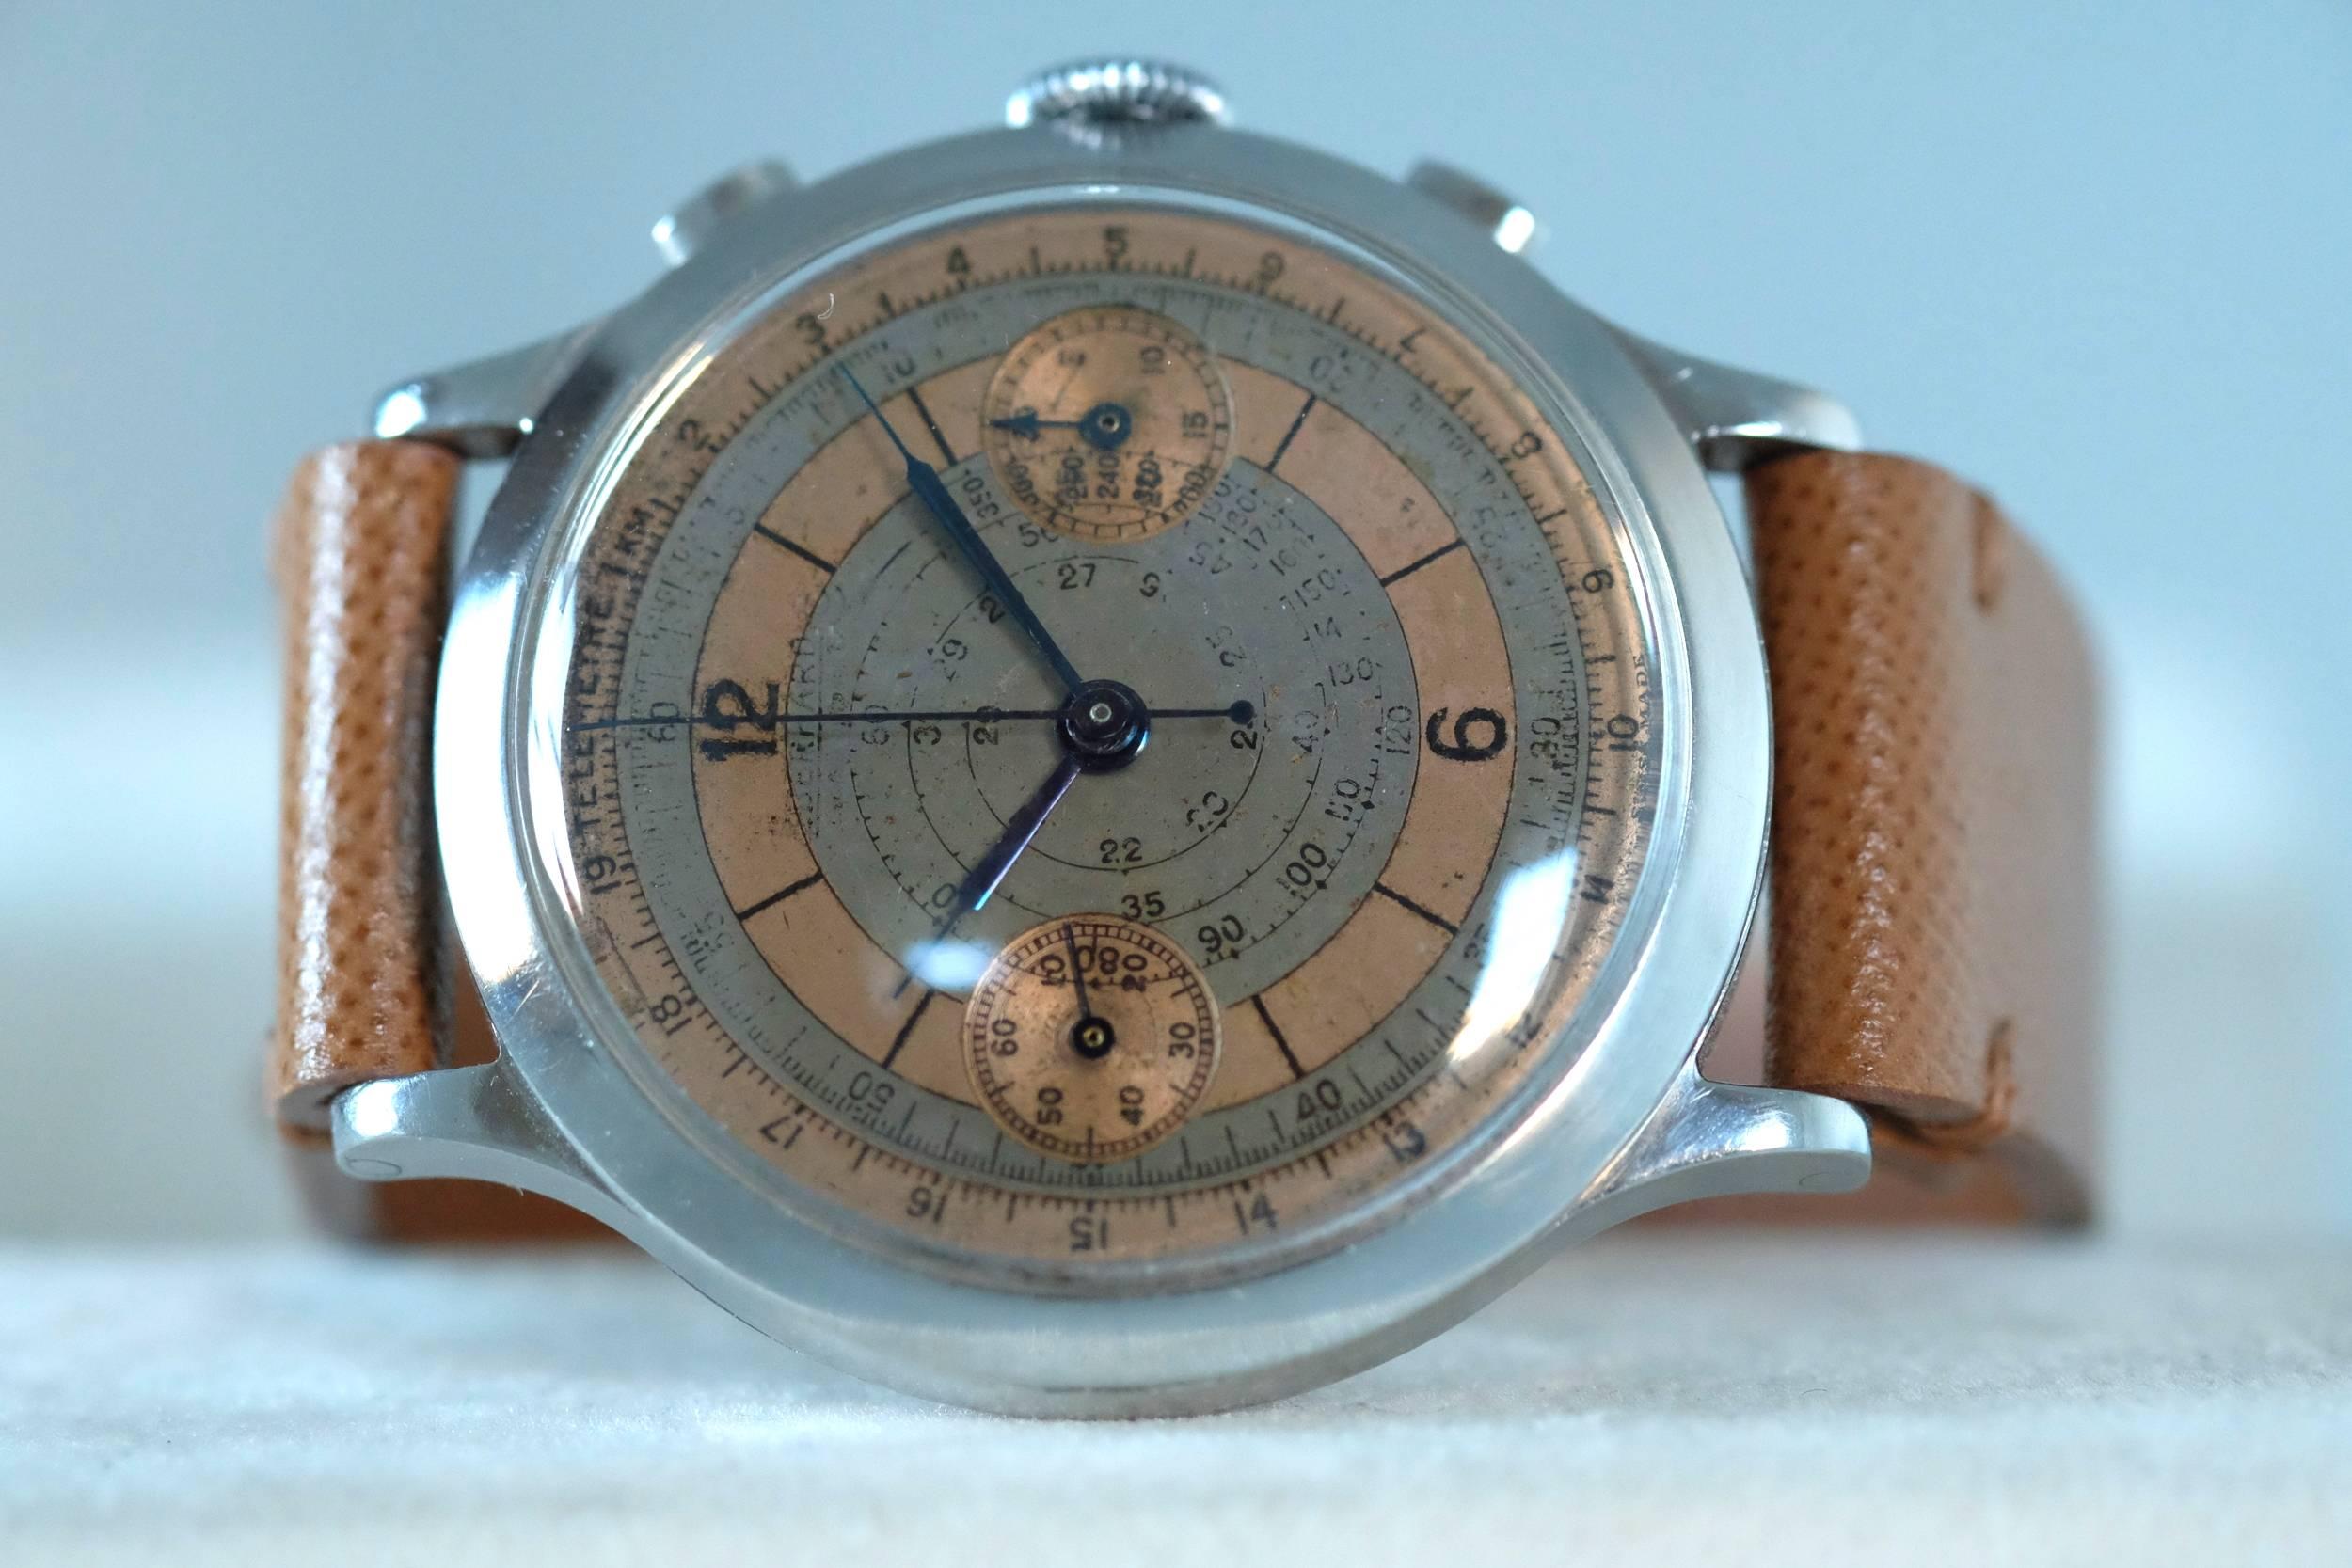 A very large Stainless Steel Double pusher Chronograph from Eberhard

Case. Three-body, polished, stepped flat bezel, concave lugs, flat band, hinged snap-on case back.

Dial. Two -Tone Salmon and grey colored dial with baton indexes and Arabic